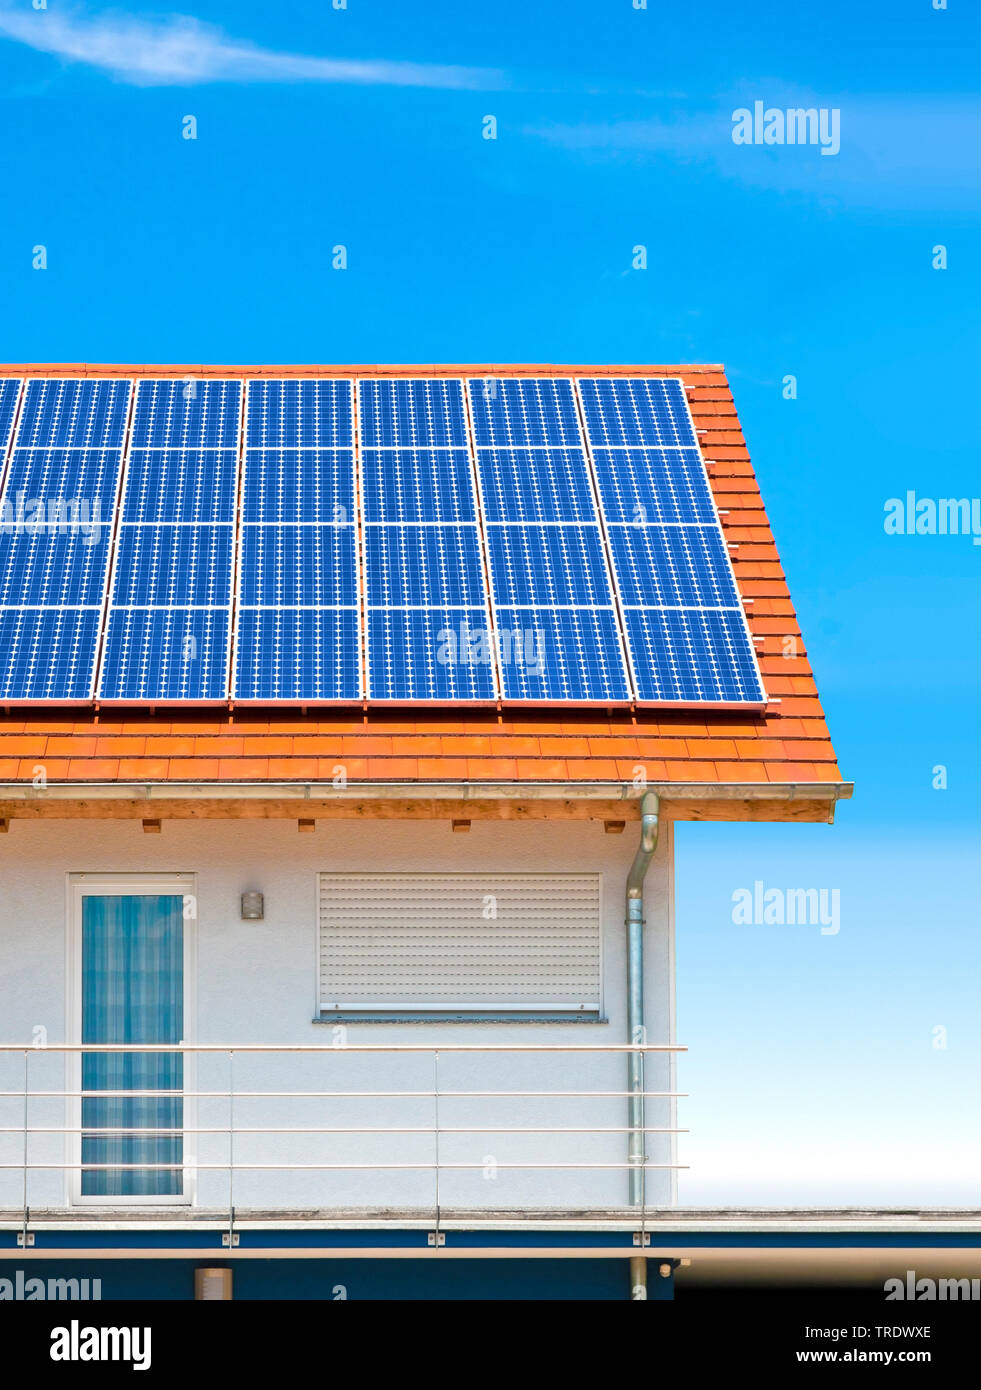 Detail of residental house roof with solar panels against blue sky Stock Photo